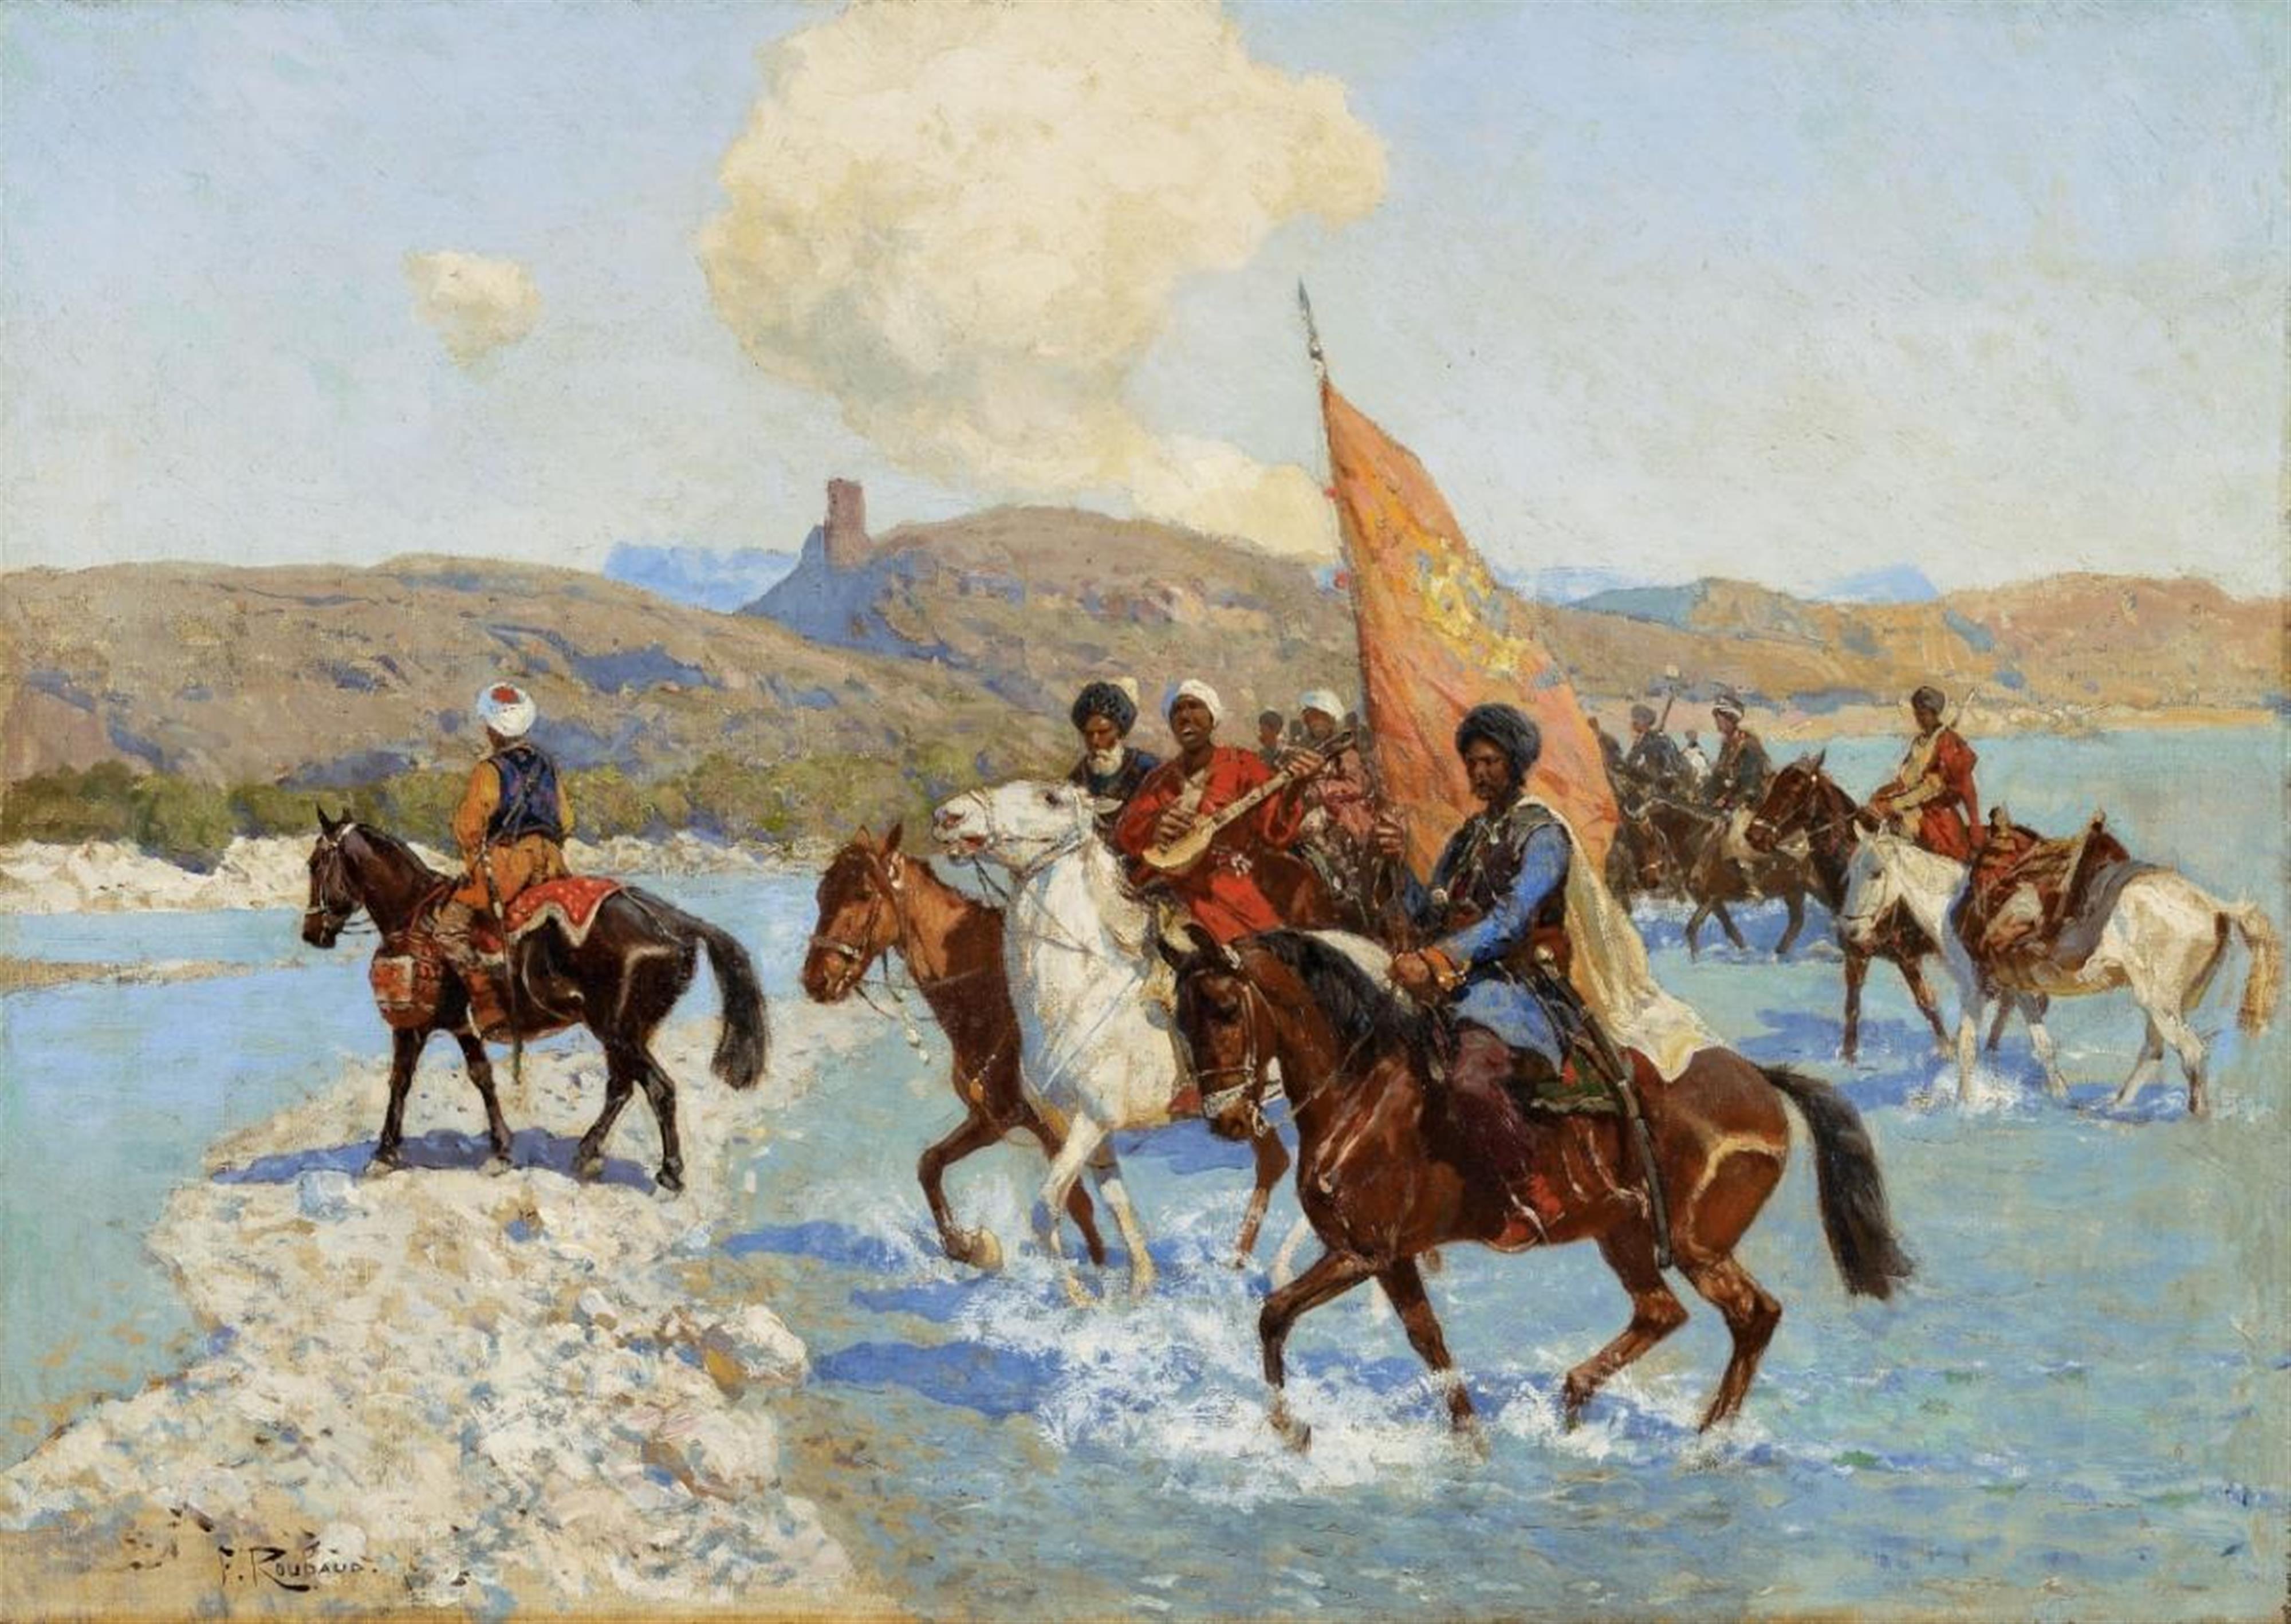 Franz Alekseyevich Roubaud - CERCASSIAN RIDERS PASSING A RIVER - image-1